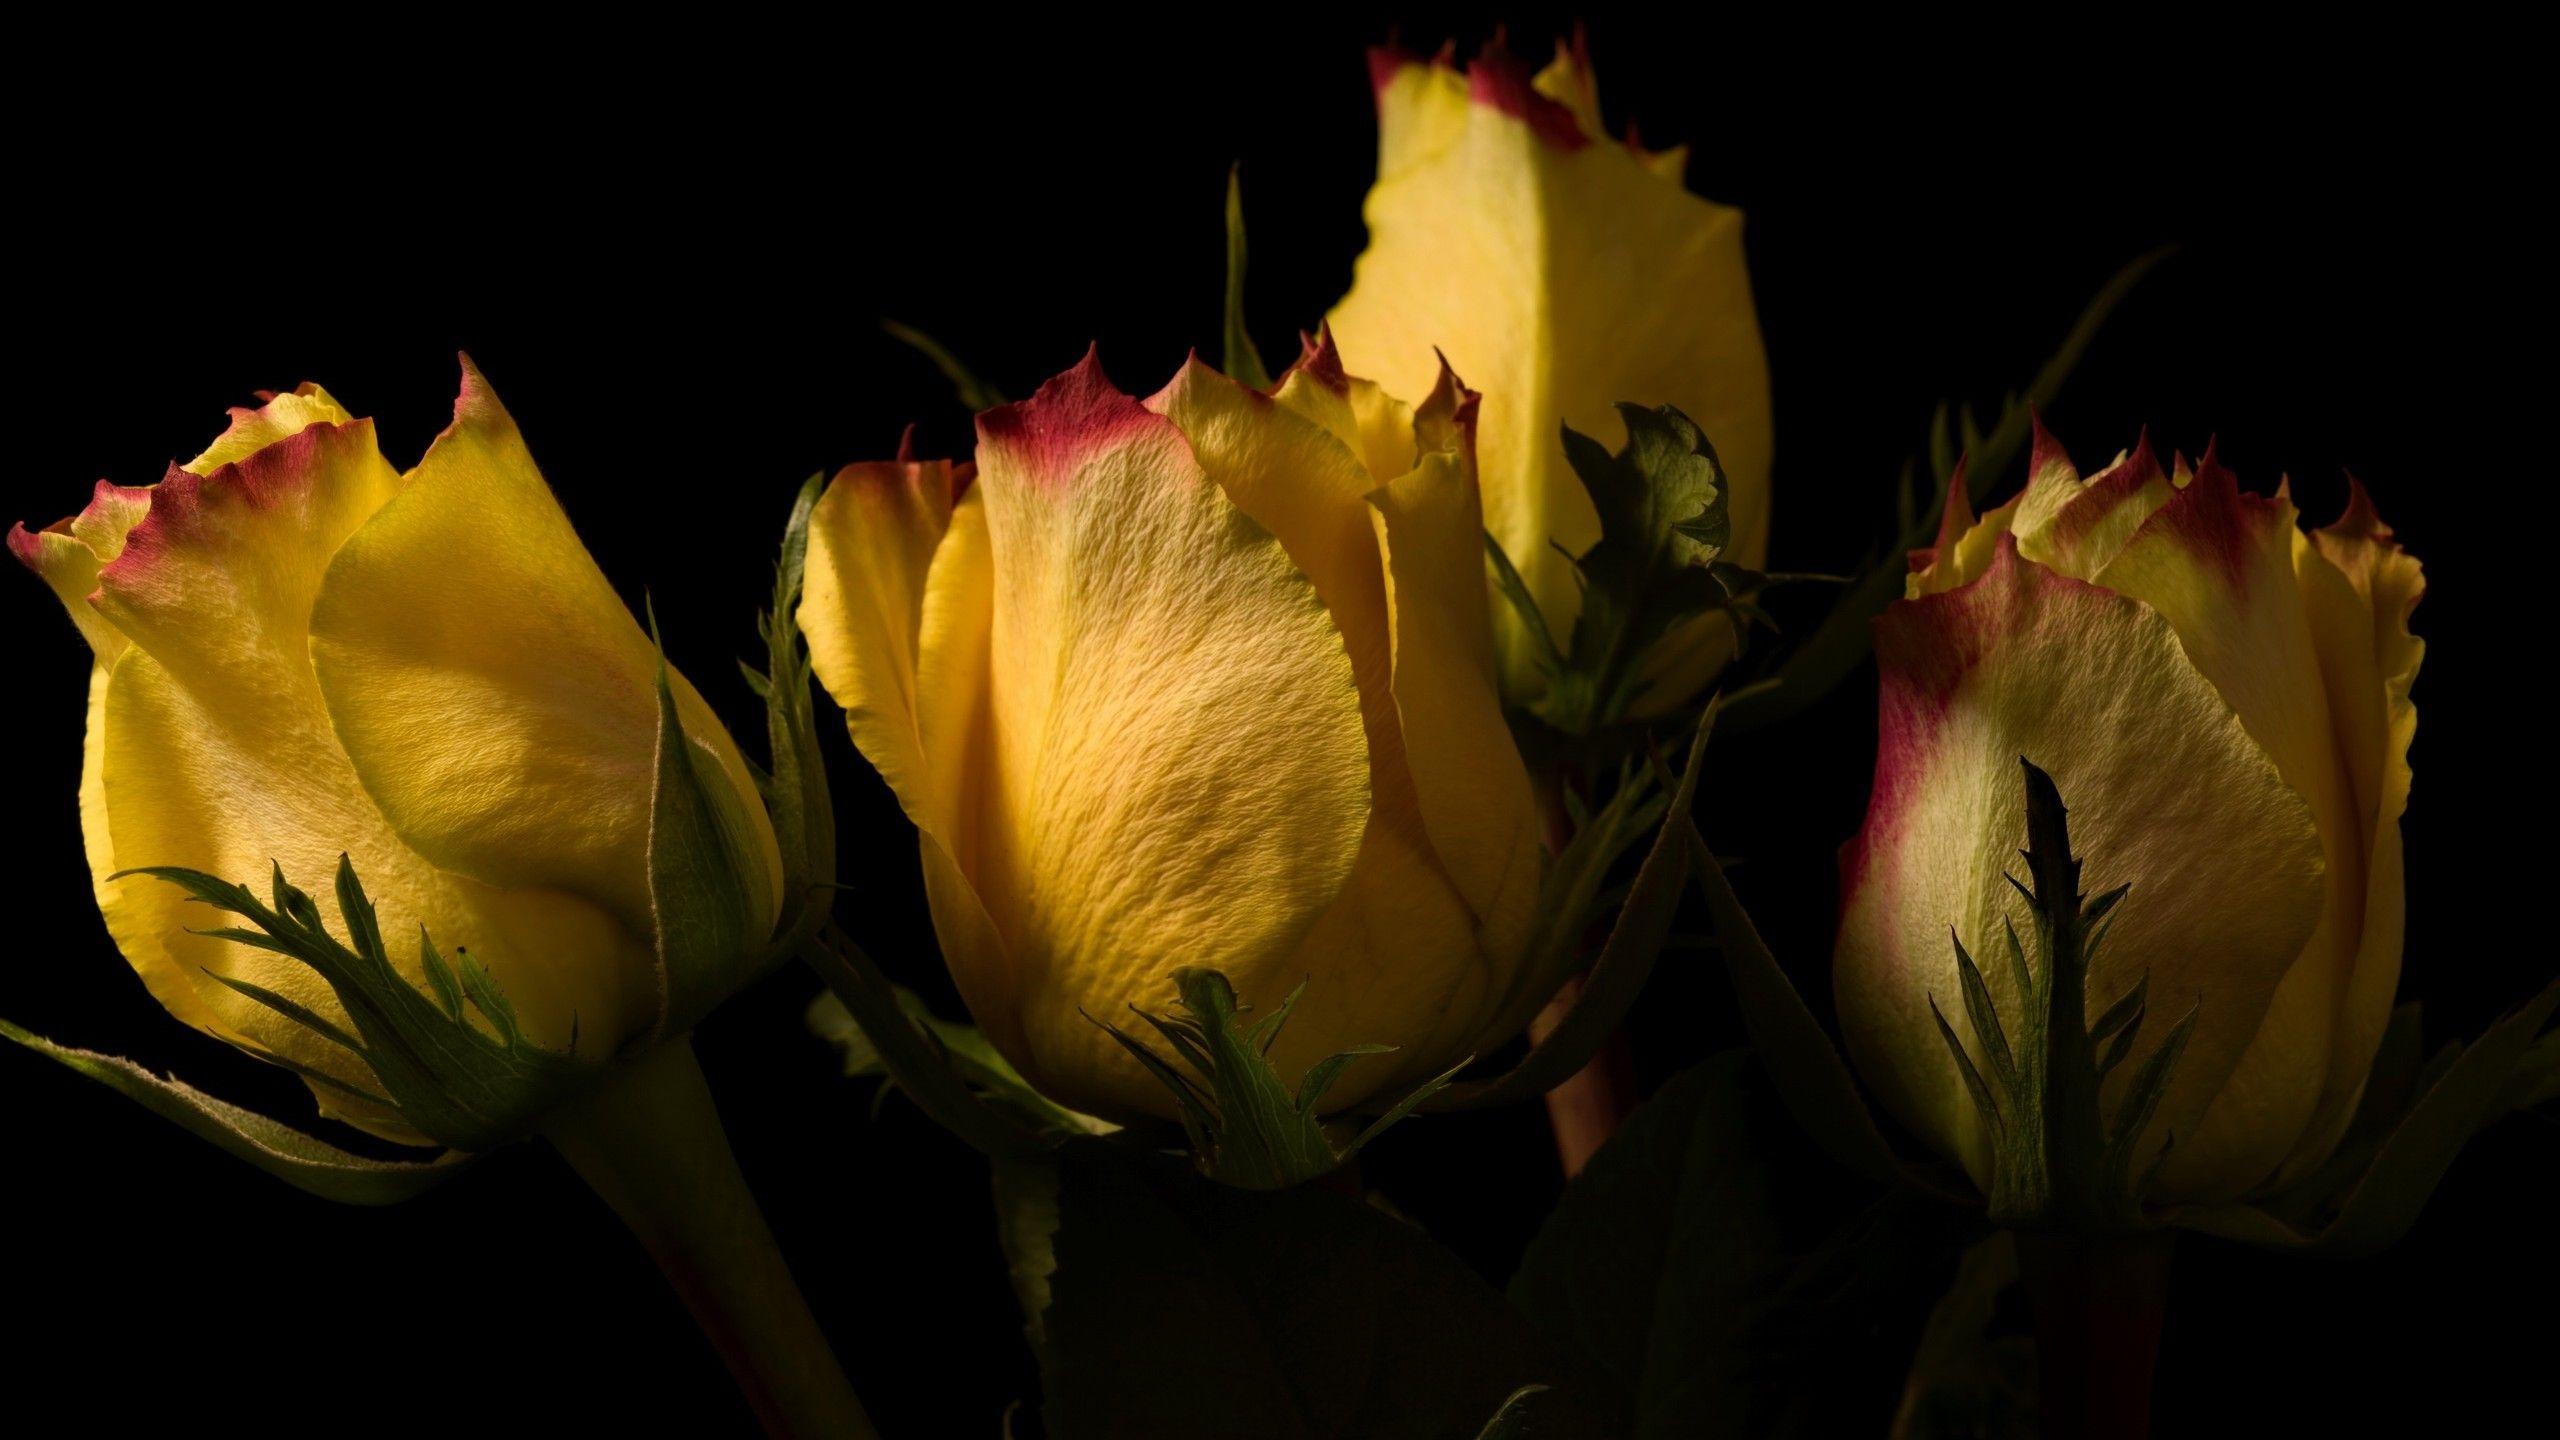 Download 2560x1440 Yellow Roses, Buds Wallpaper for iMac 27 inch